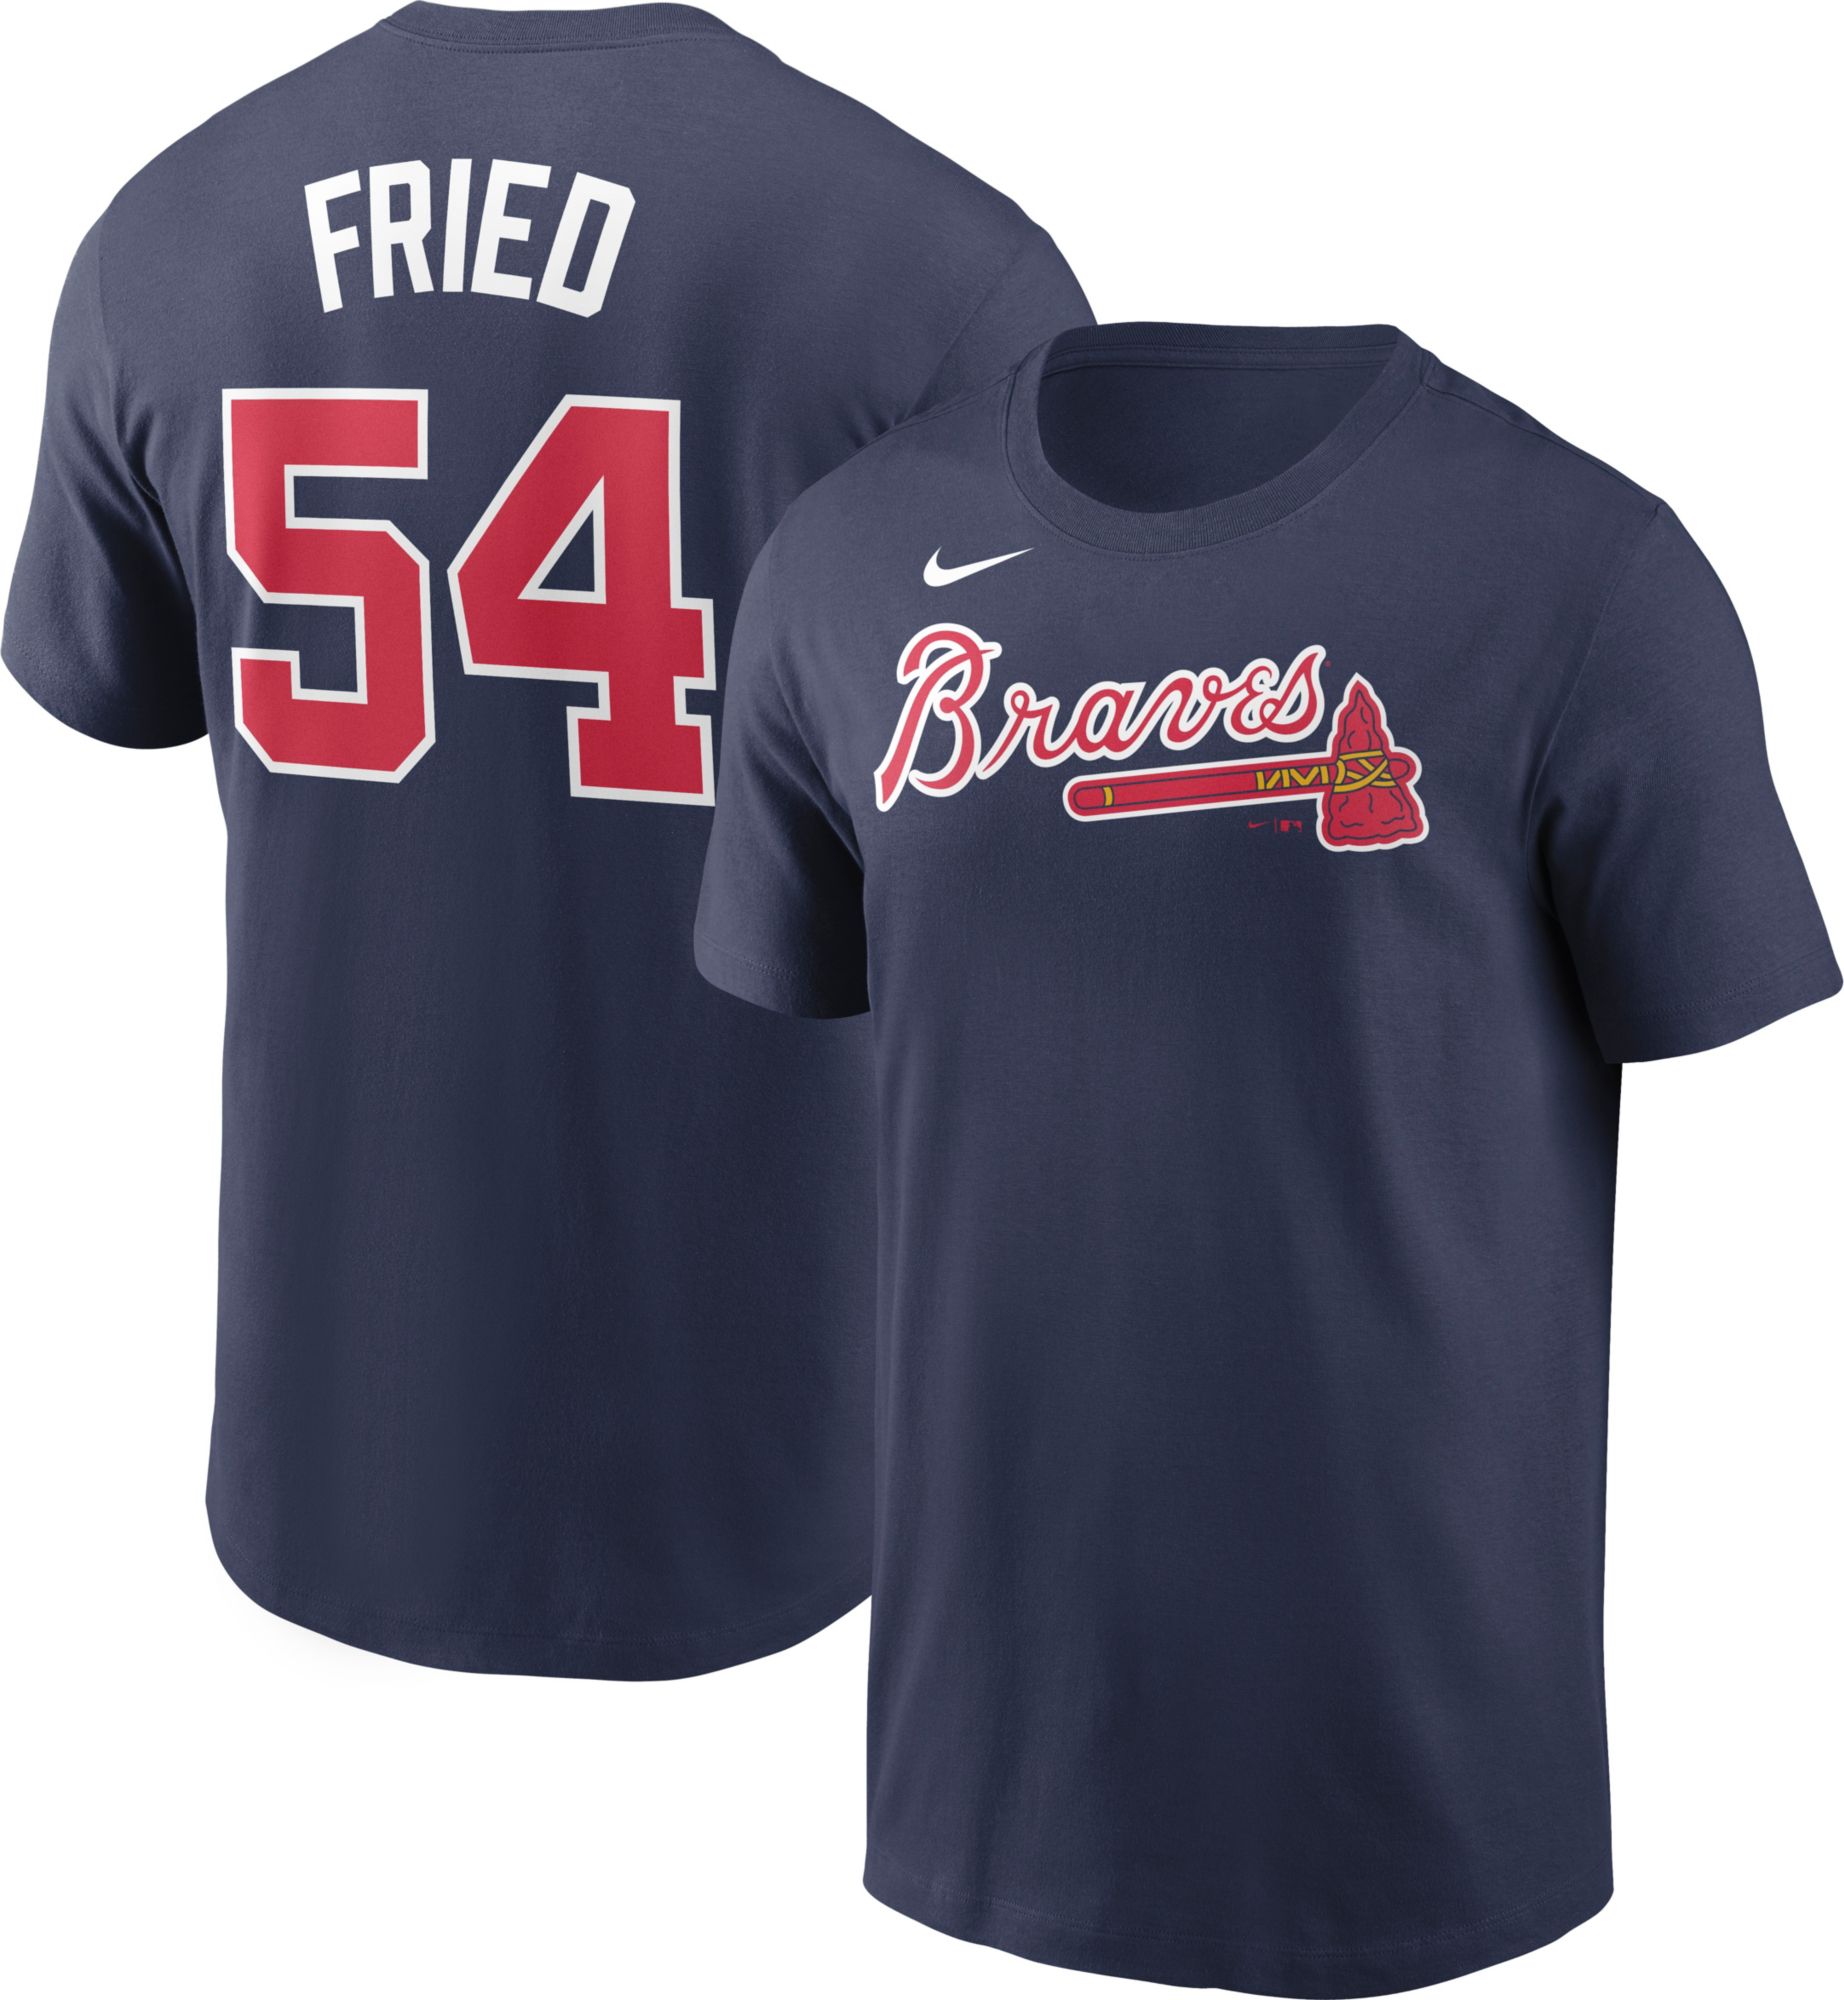 2021 Memorial Day Max Fried Authentic White Jersey Atlanta Braves